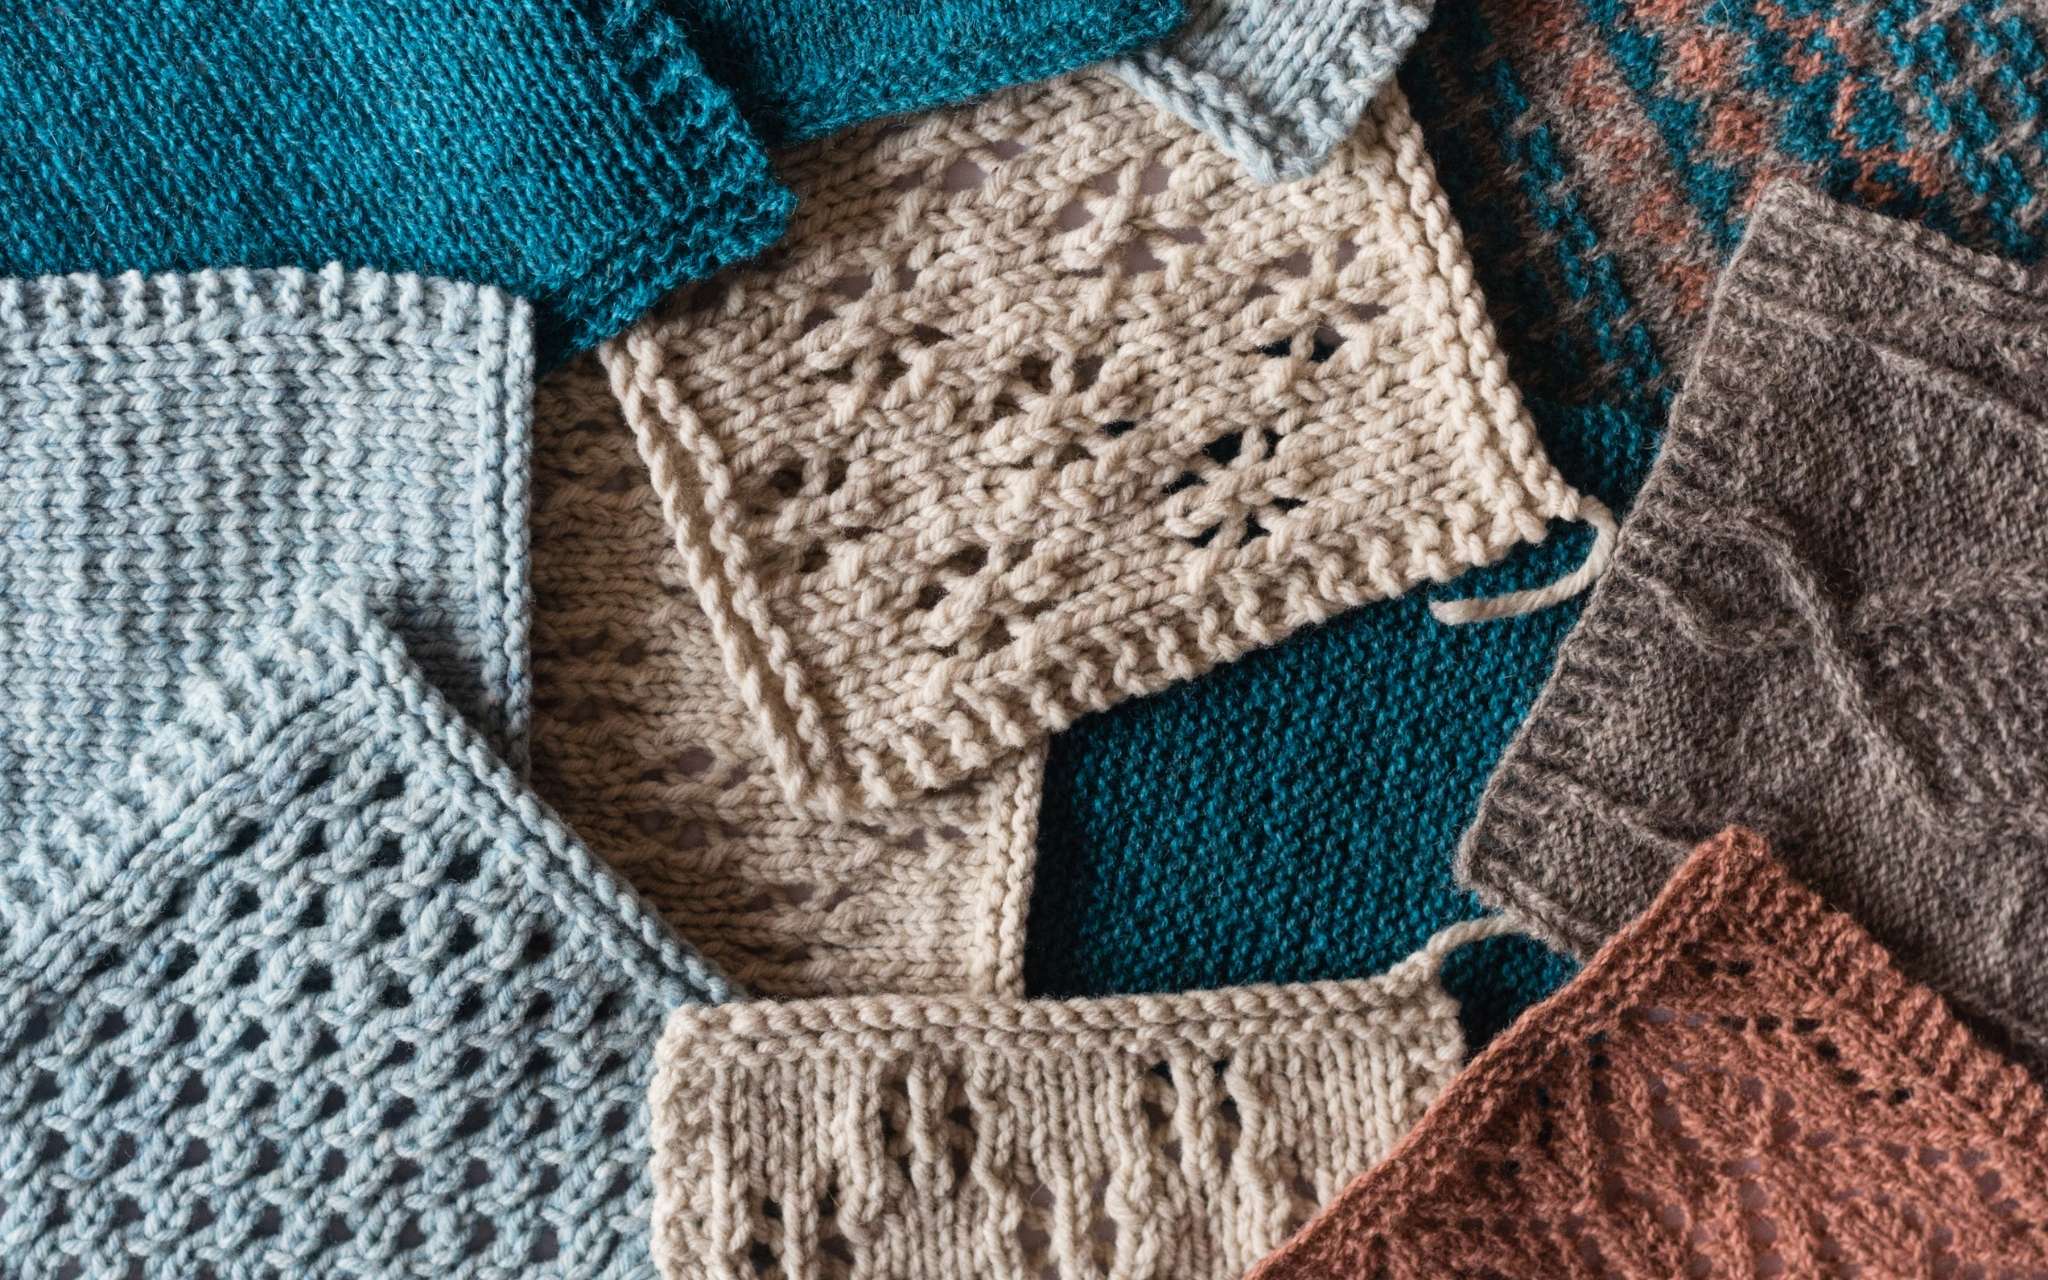 A pile of swatches, all laying flat and overlapping so that they are all that is visible. They are knitted in lace and textured stitch patterns in shades of beige, blues and brown.s